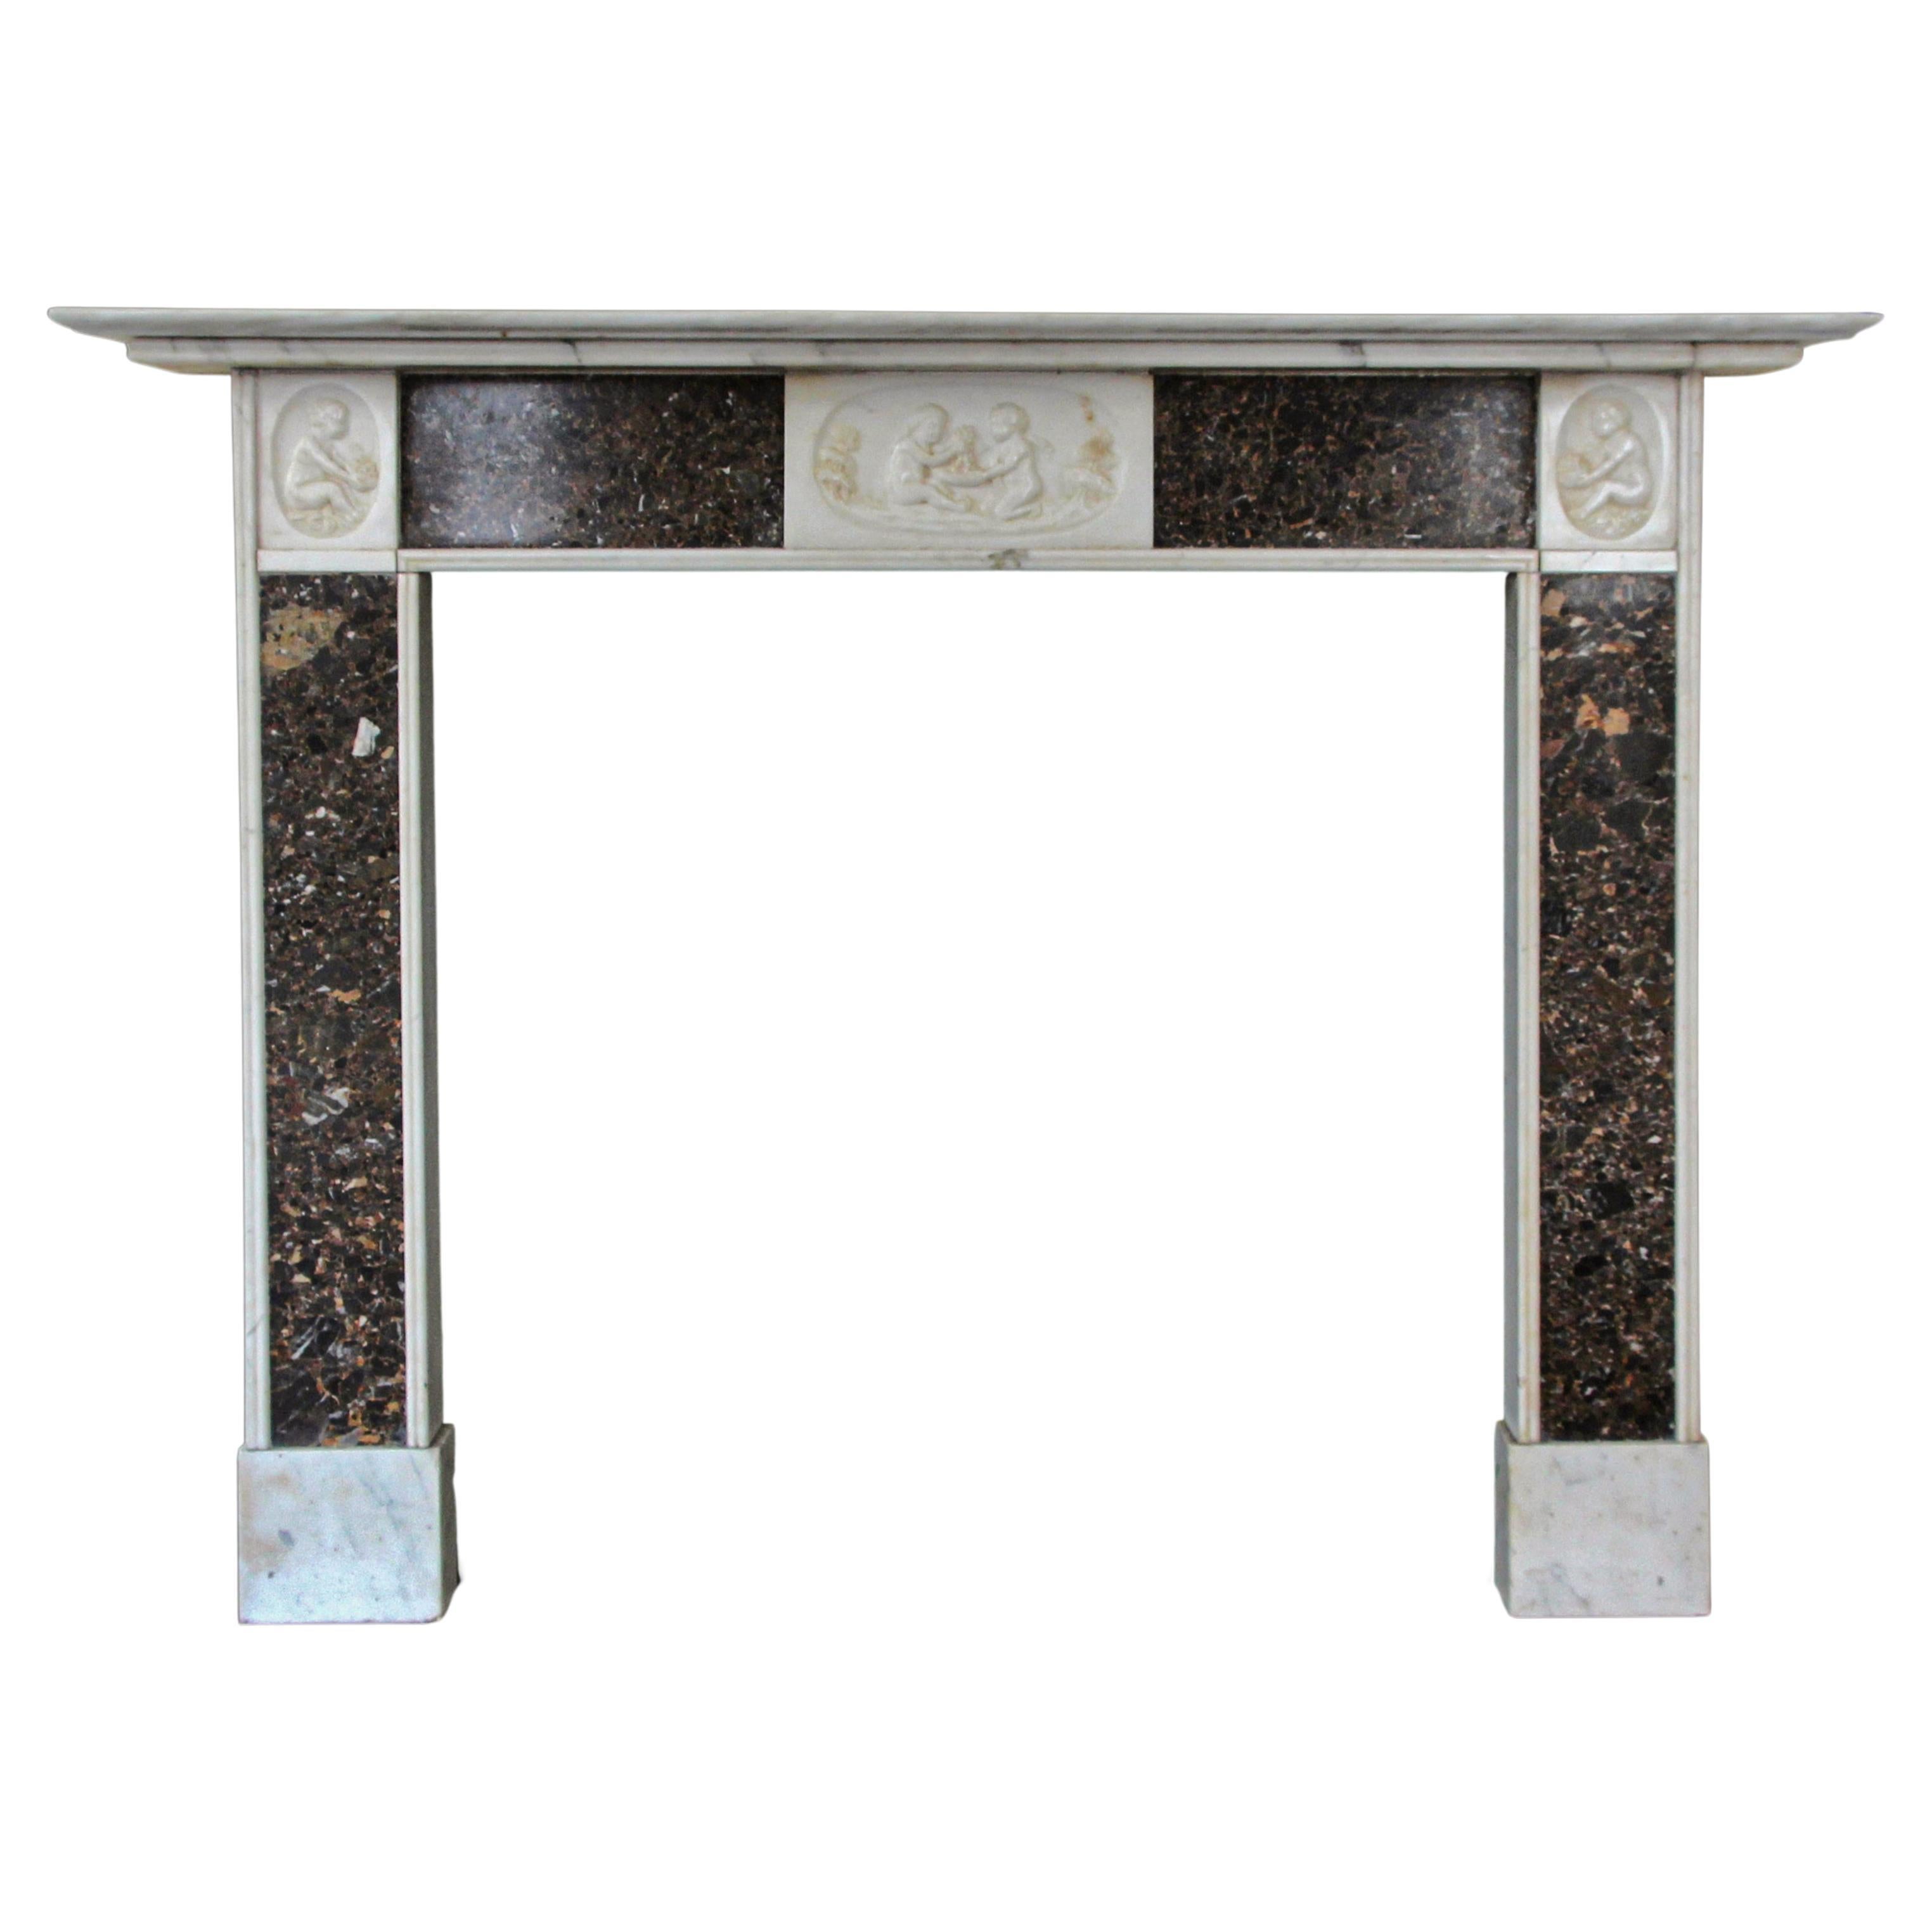 Inset Fossil Marble  Mantel Waldorf Astoria Hotel English Regency For Sale